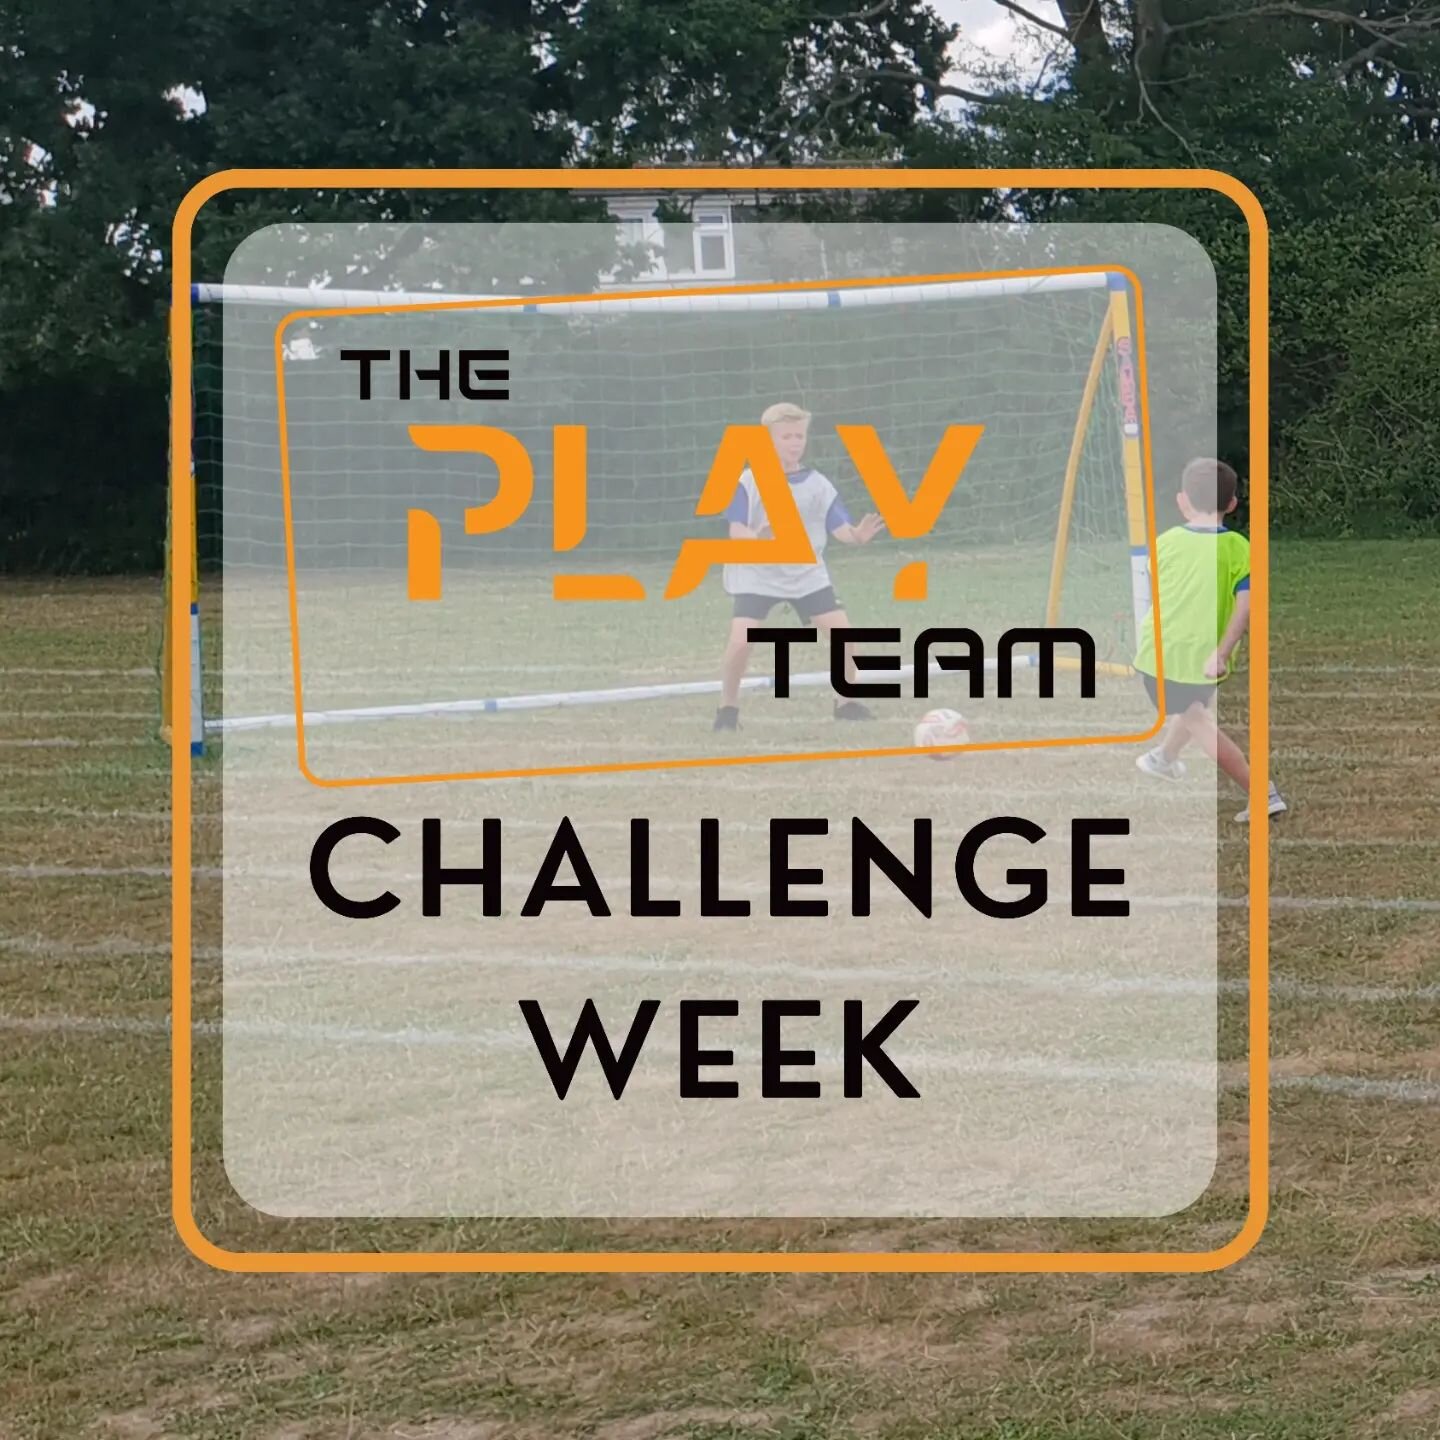 It&rsquo;s that time again &hellip; Challenge week is here!

Yesterday saw the start of a programme of challenges across all our after-school clubs.

Challenge week represents a great opportunity for children to put their skills to the test and pit